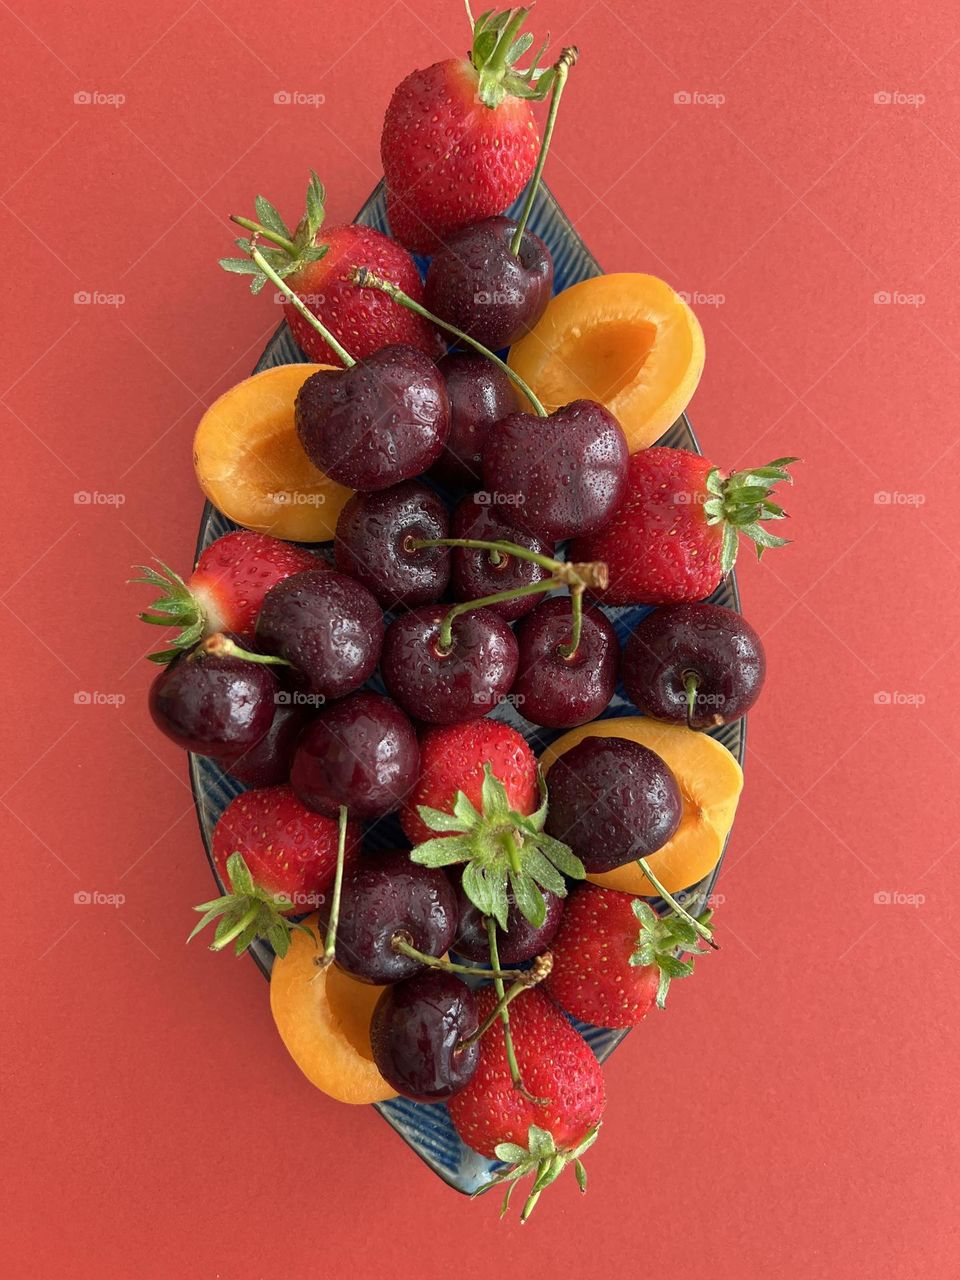 Summer treats, summer time, summer mood. Tasty summer berries and apricot. Refreshing snacks.